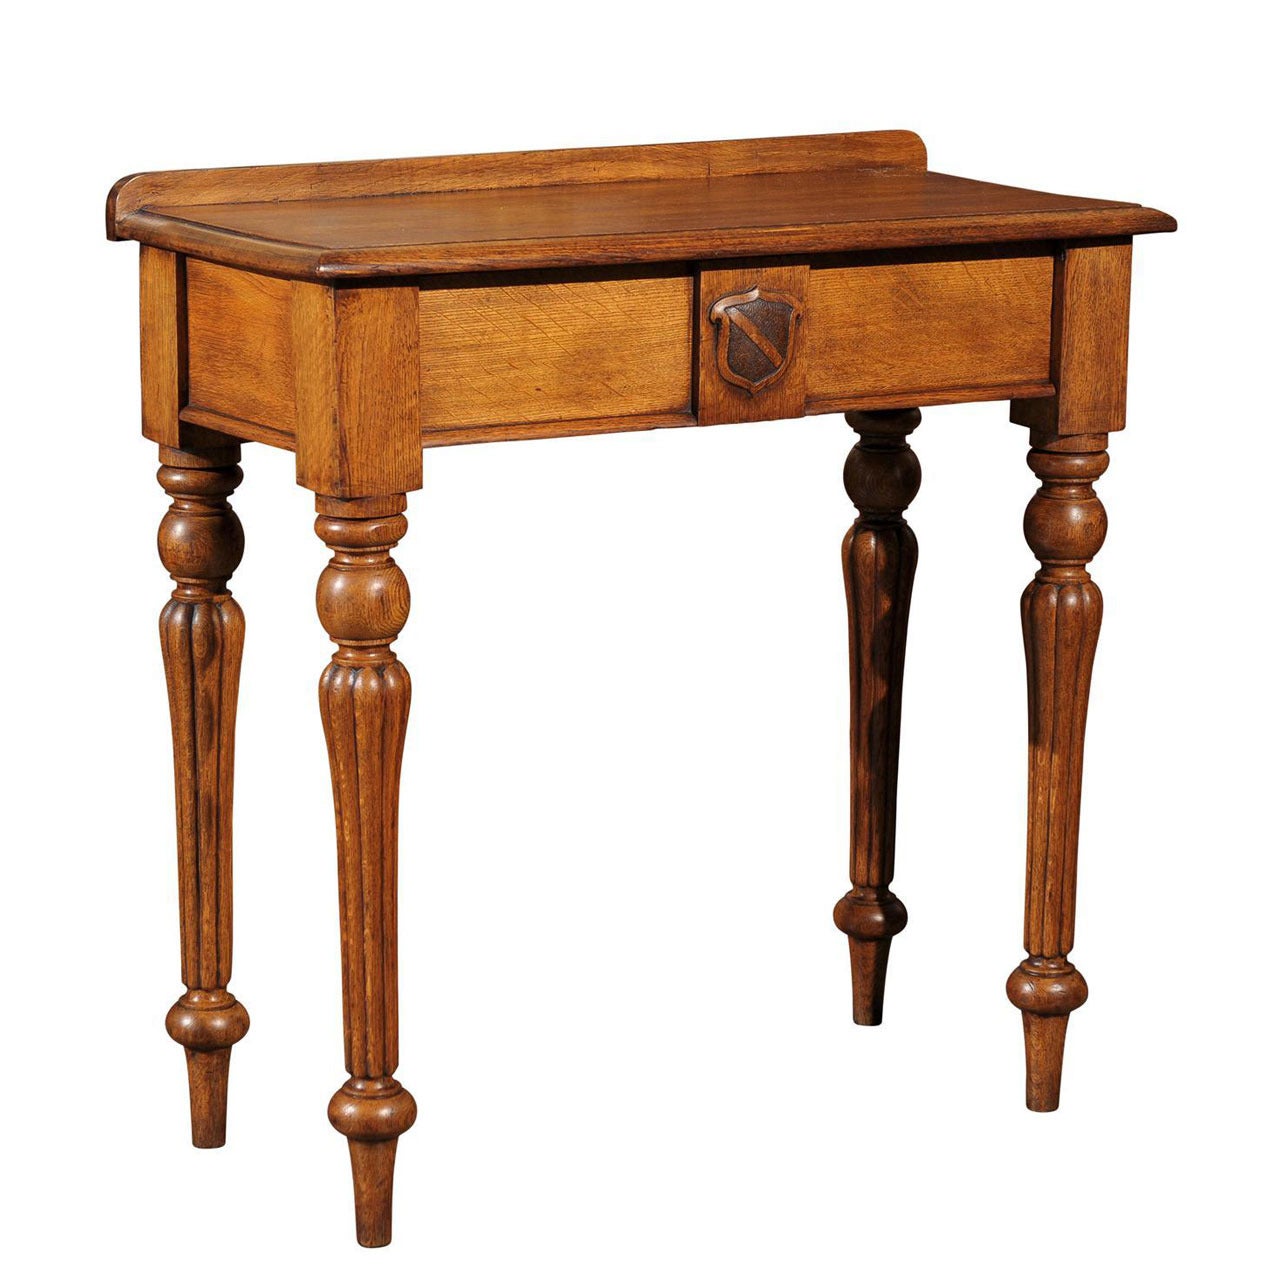 English 1880s Oak Console Table with Single Drawer, Shield Motif and Reeded Legs